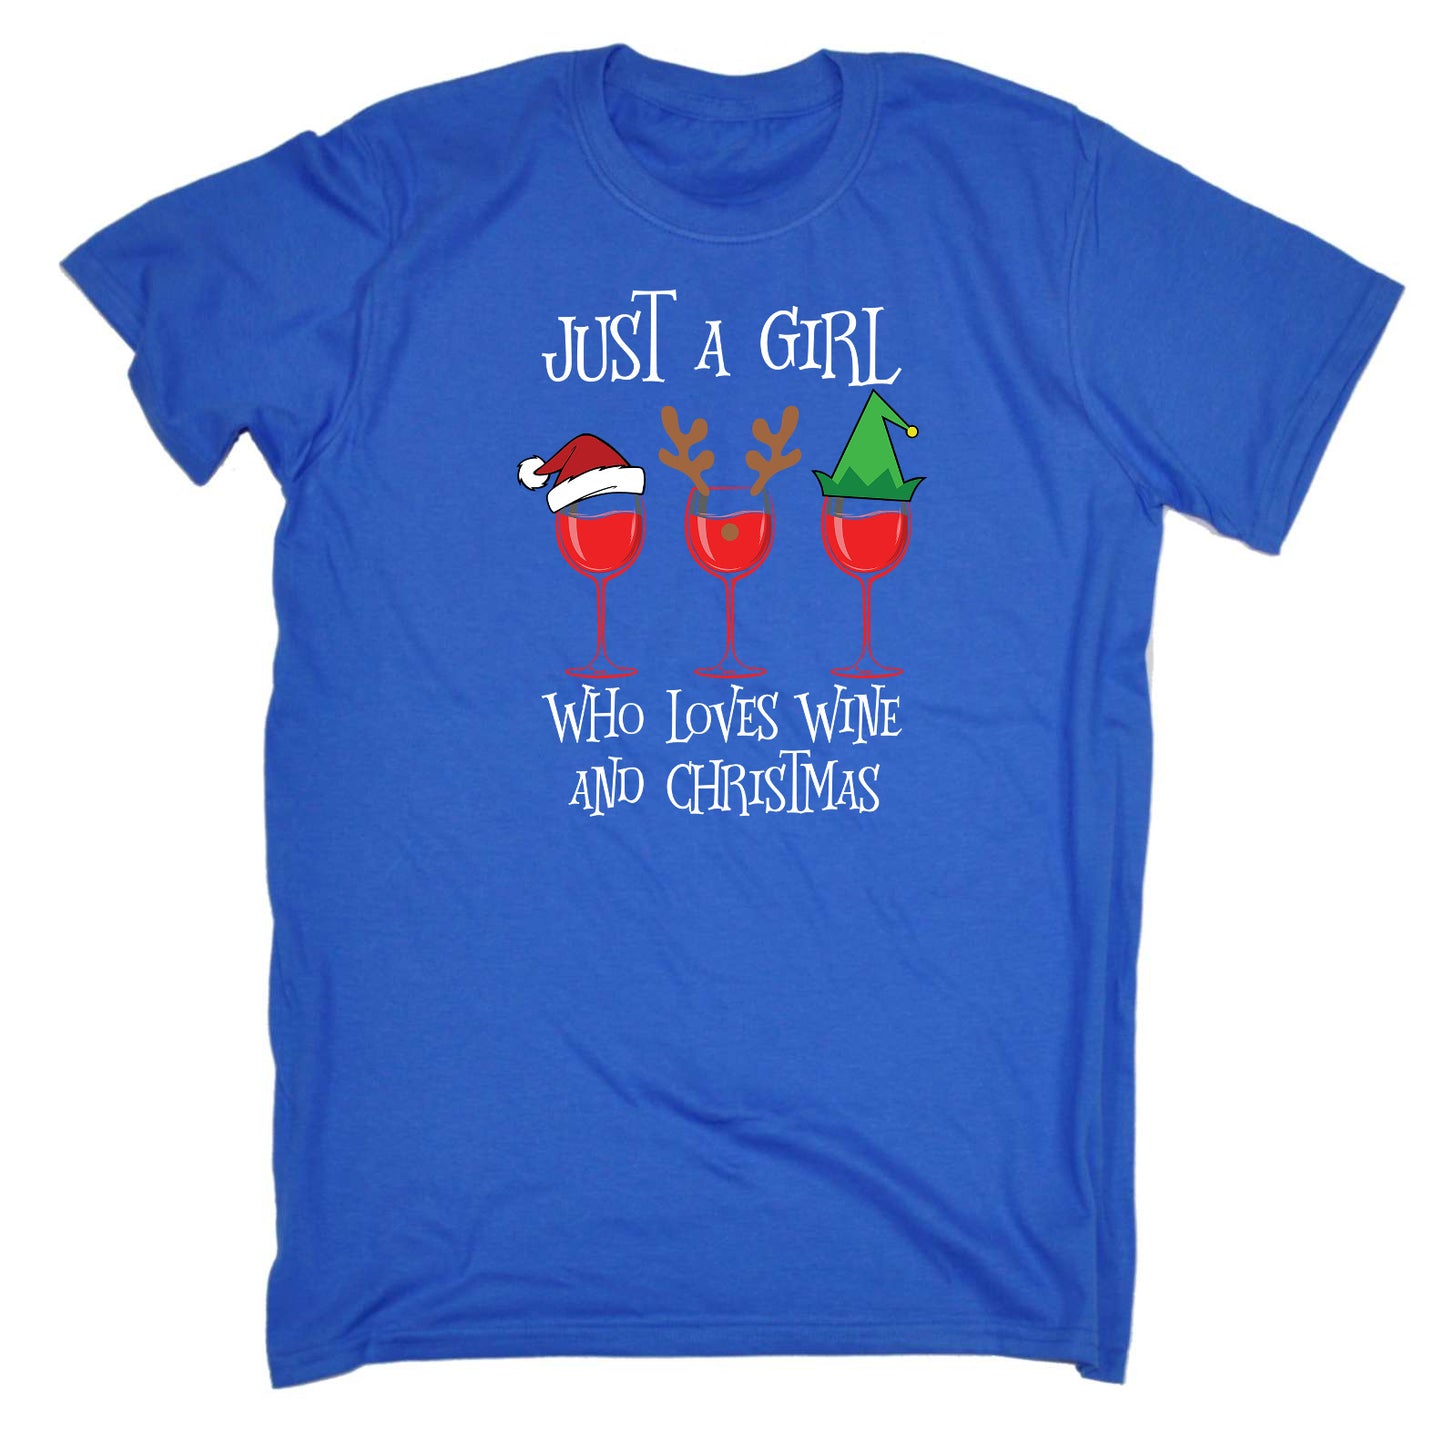 Just A Girl Who Loves Wind And Christmas - Mens Funny T-Shirt Tshirts